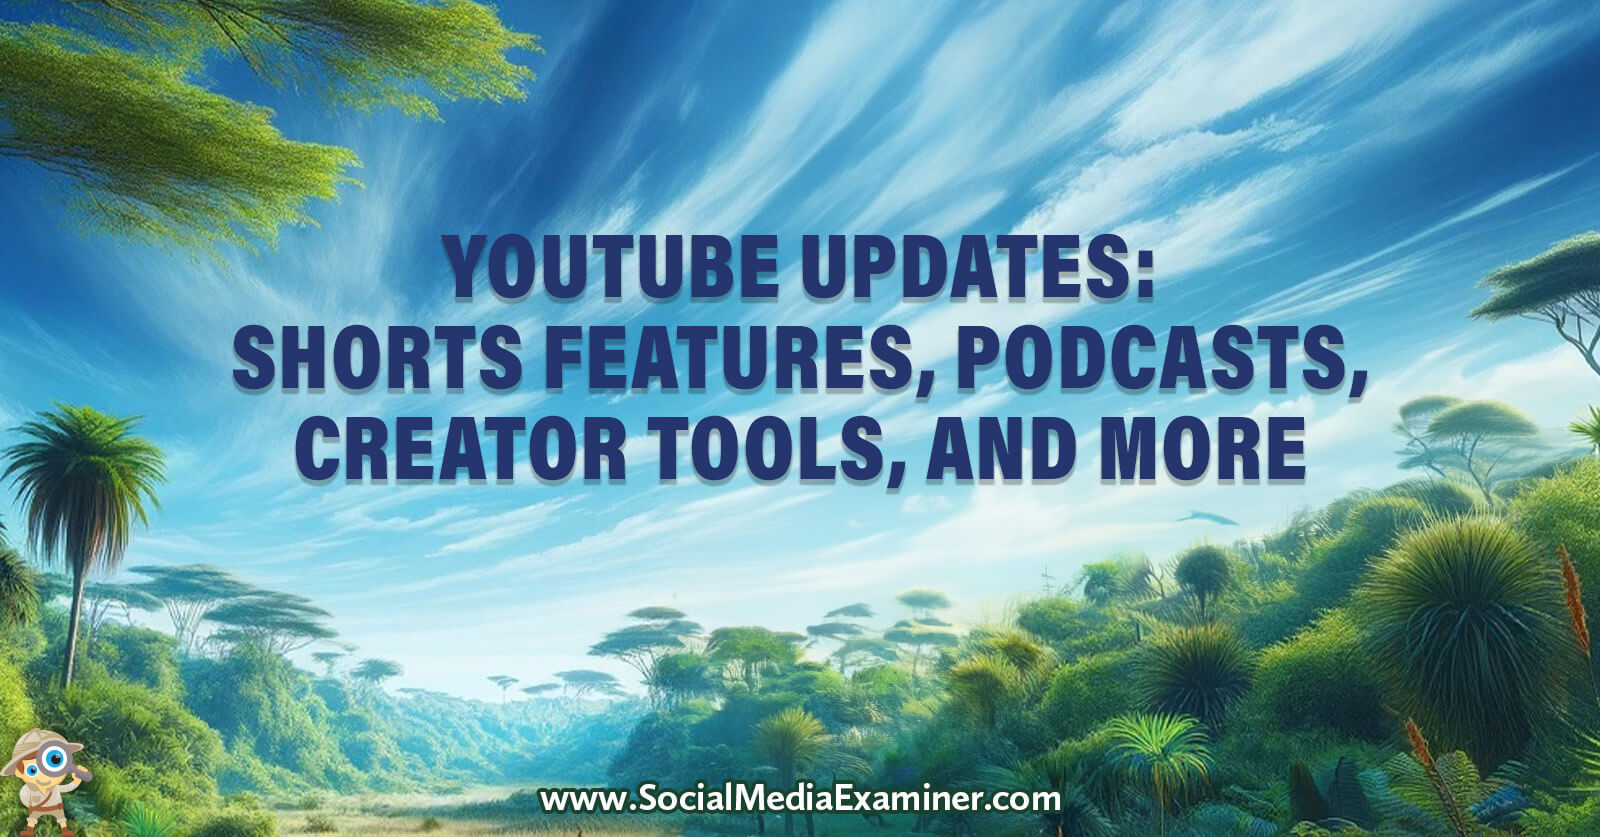 YouTube Updates: Shorts Features, Creator Tools, Podcasts, and More by Social Media Examiner